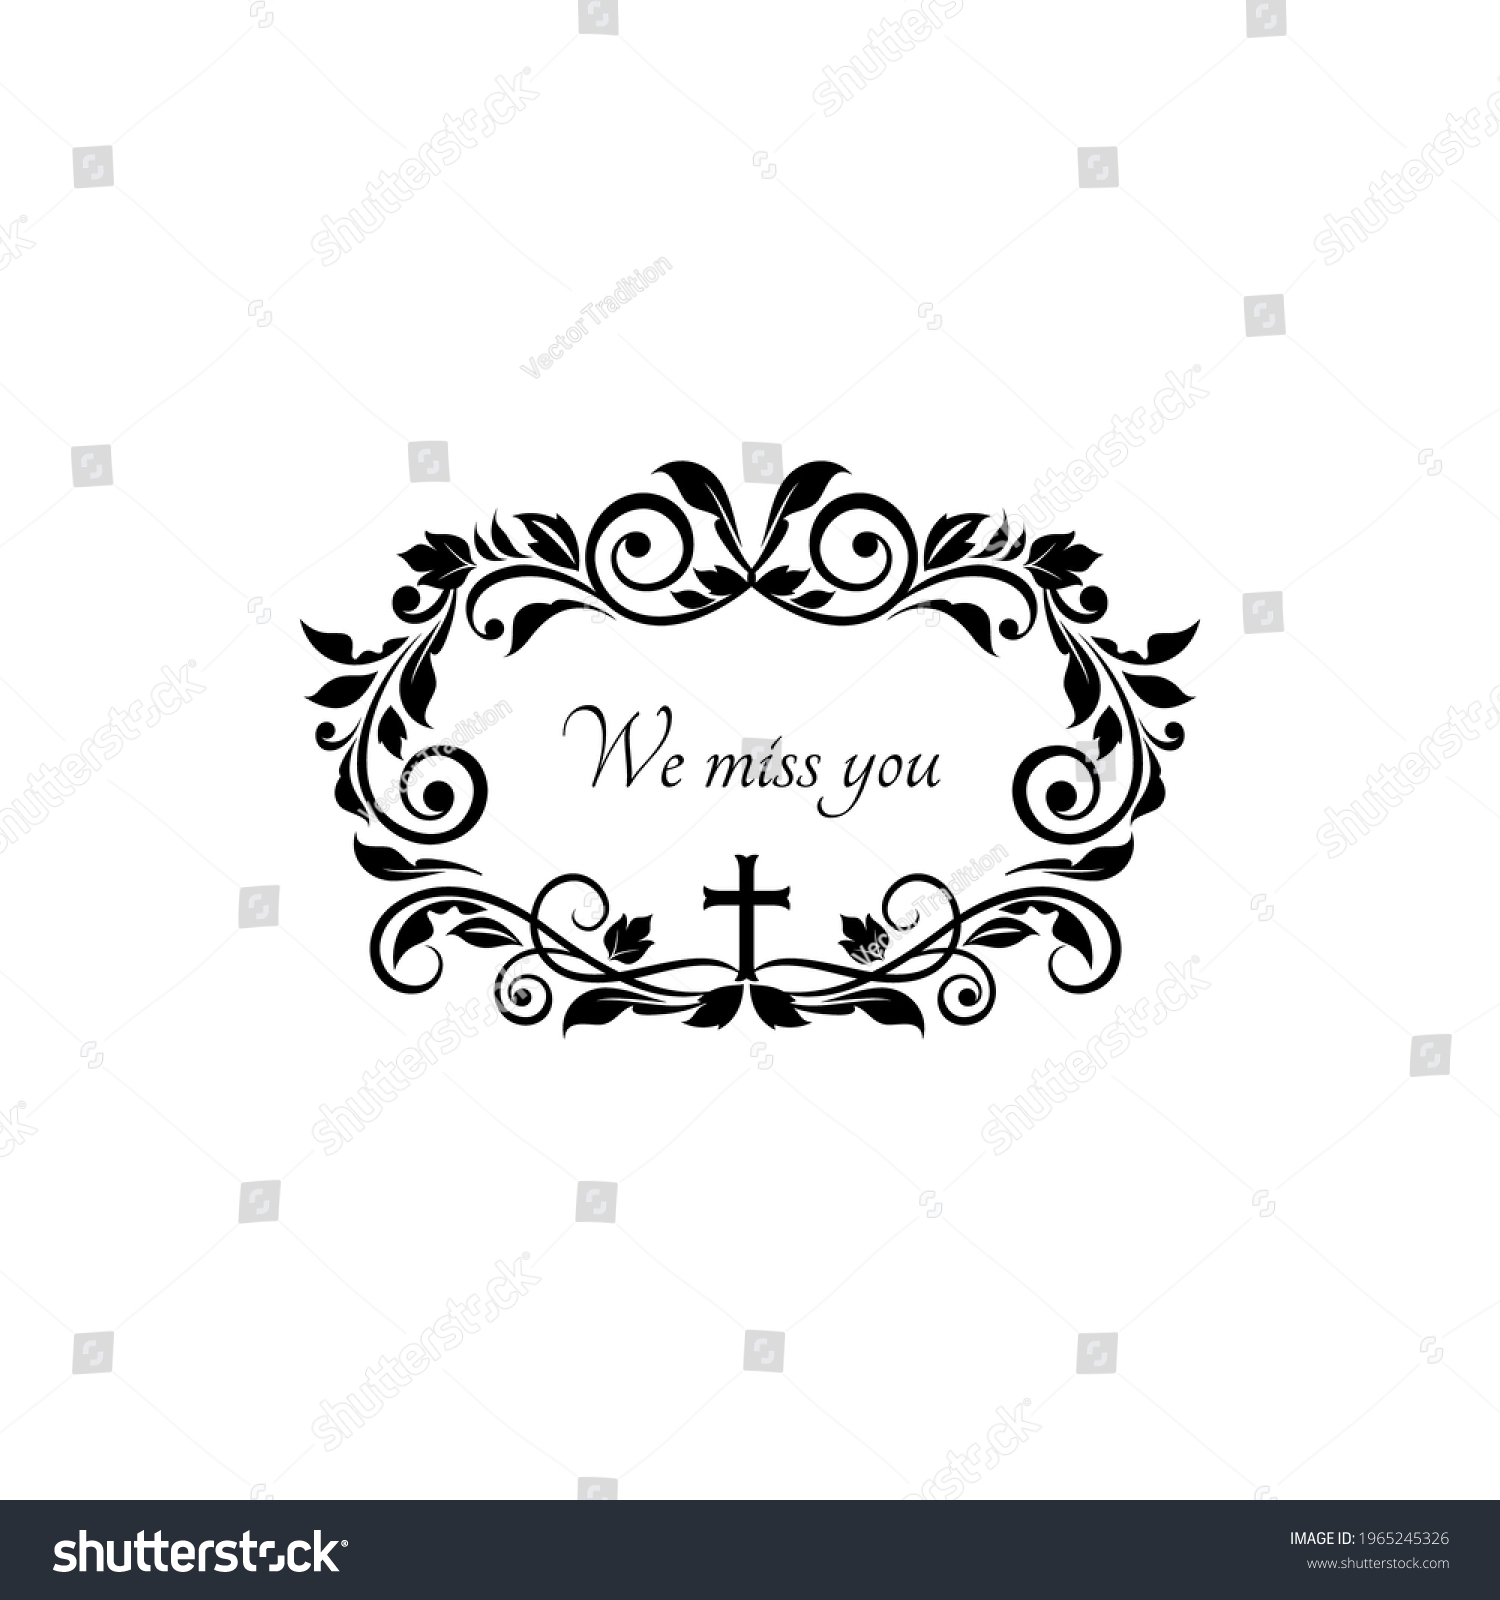 SVG of Gravestone decorative lettering we miss you in funeral frame, black flowers ornament and crucifix cross isolated. Vector condolence message on gravestone, funeral obituary memorial, text on tombstone svg